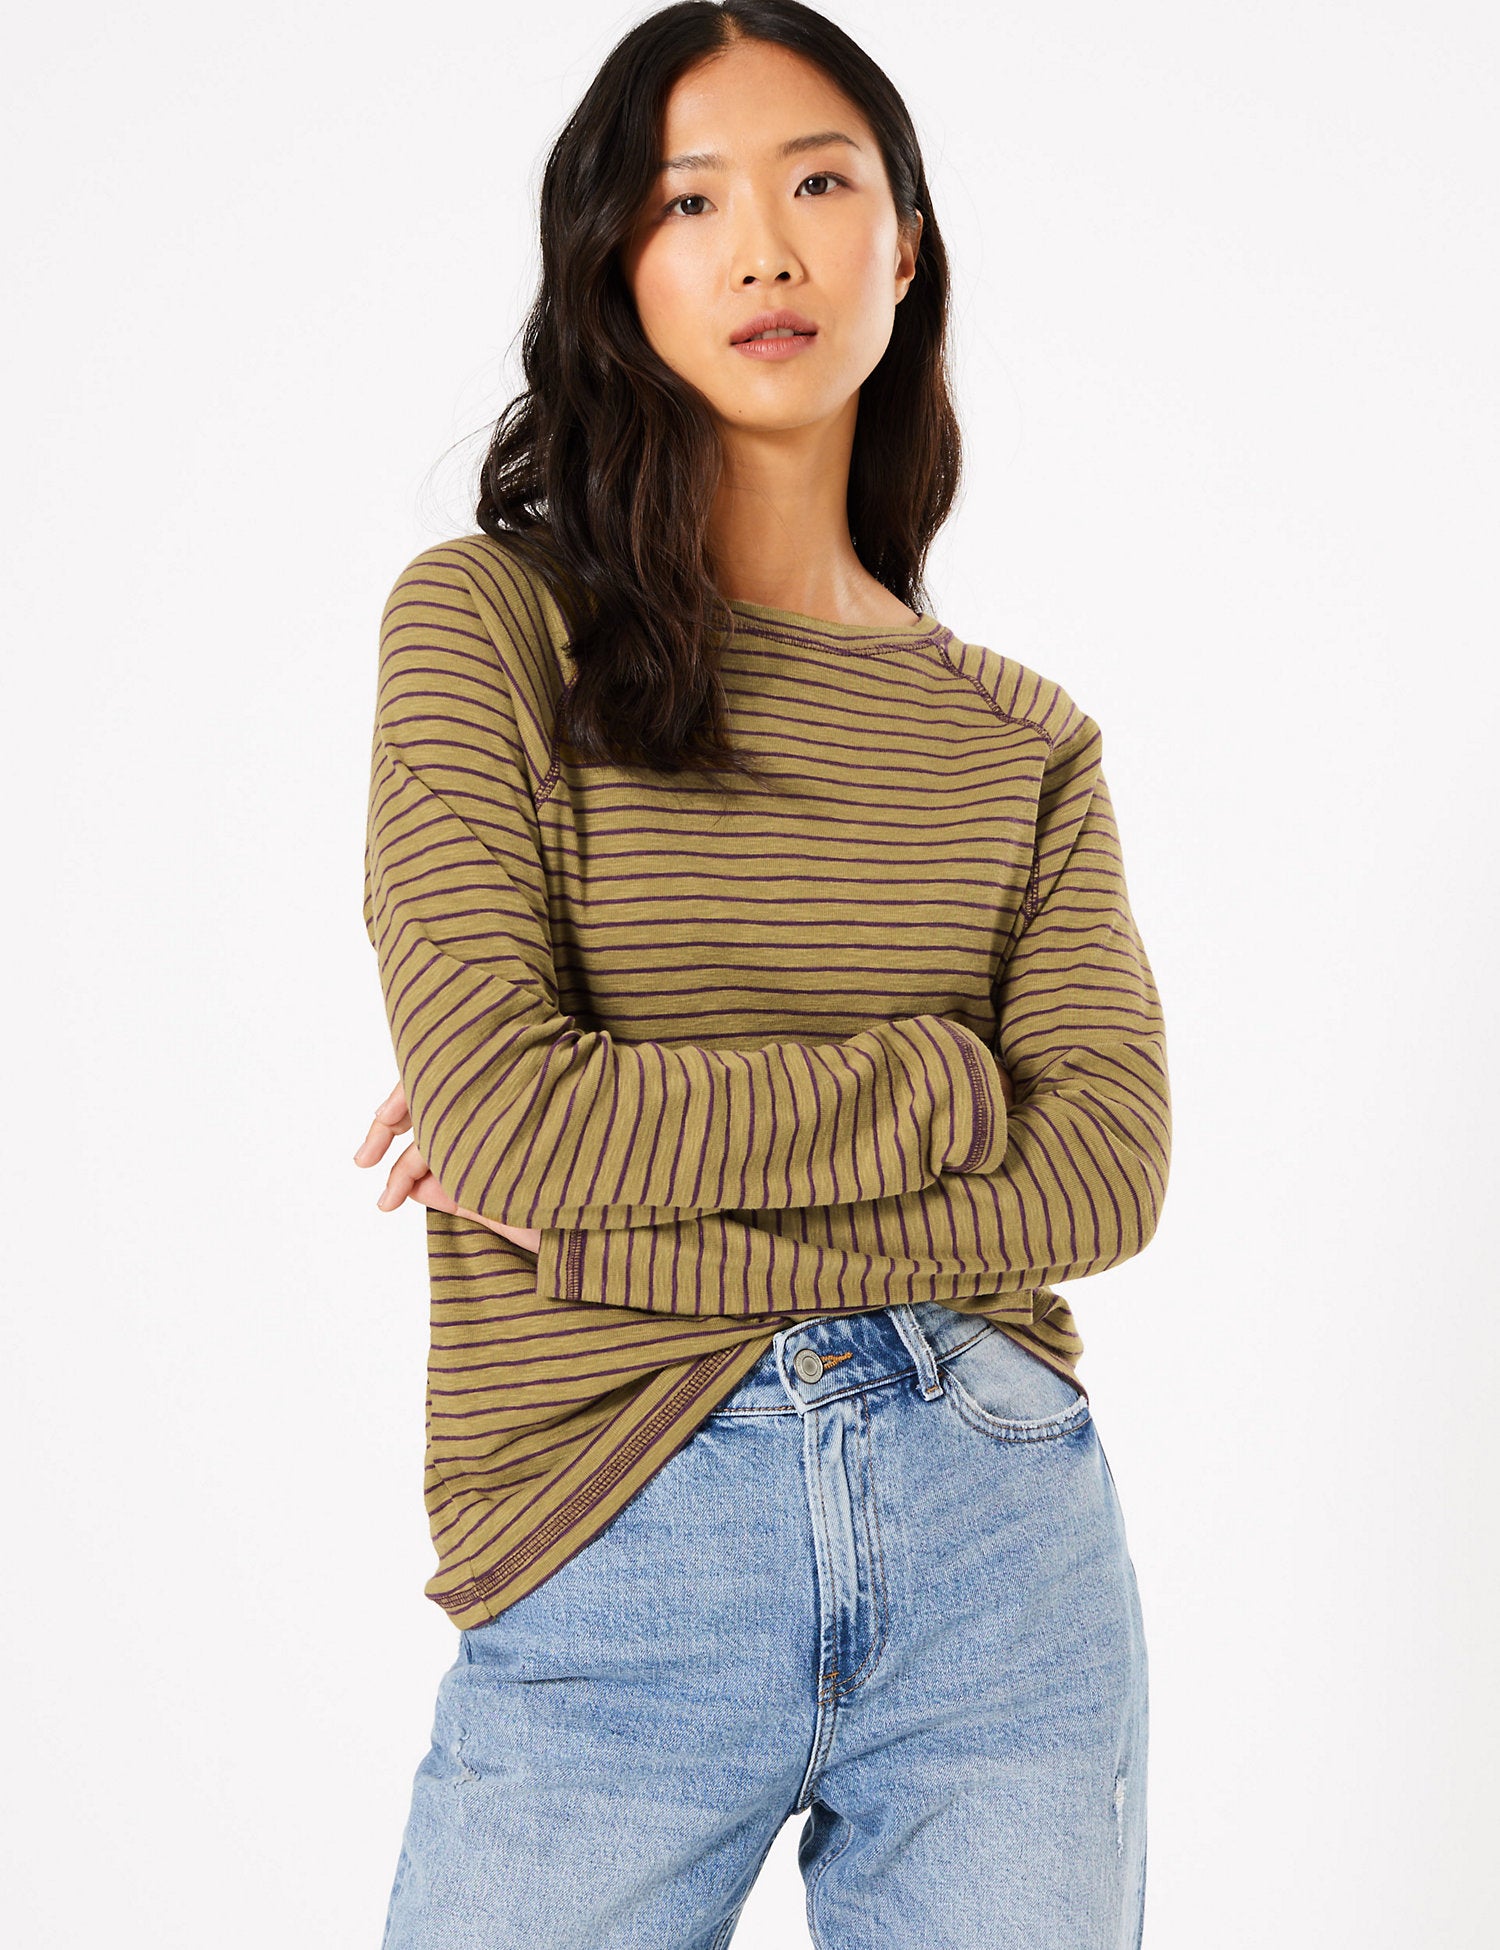 Striped Straight Fit Top